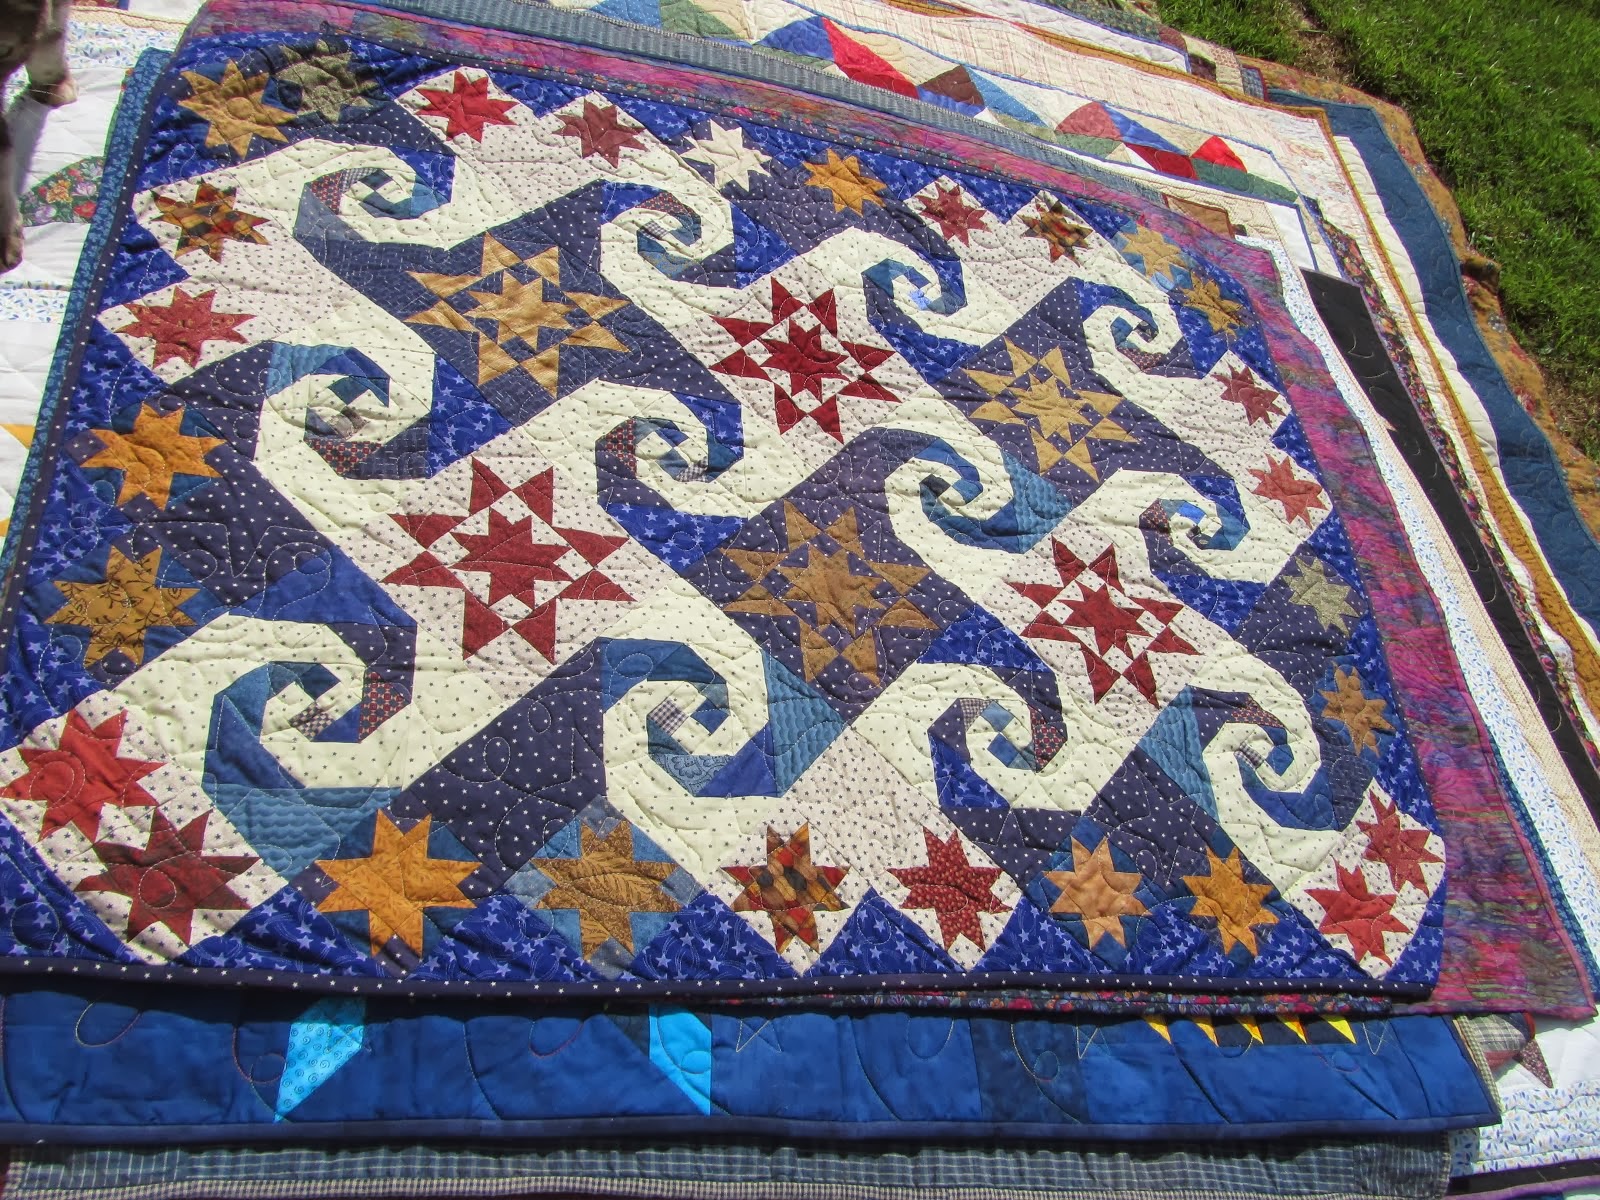 SOME OF MY QUILTS